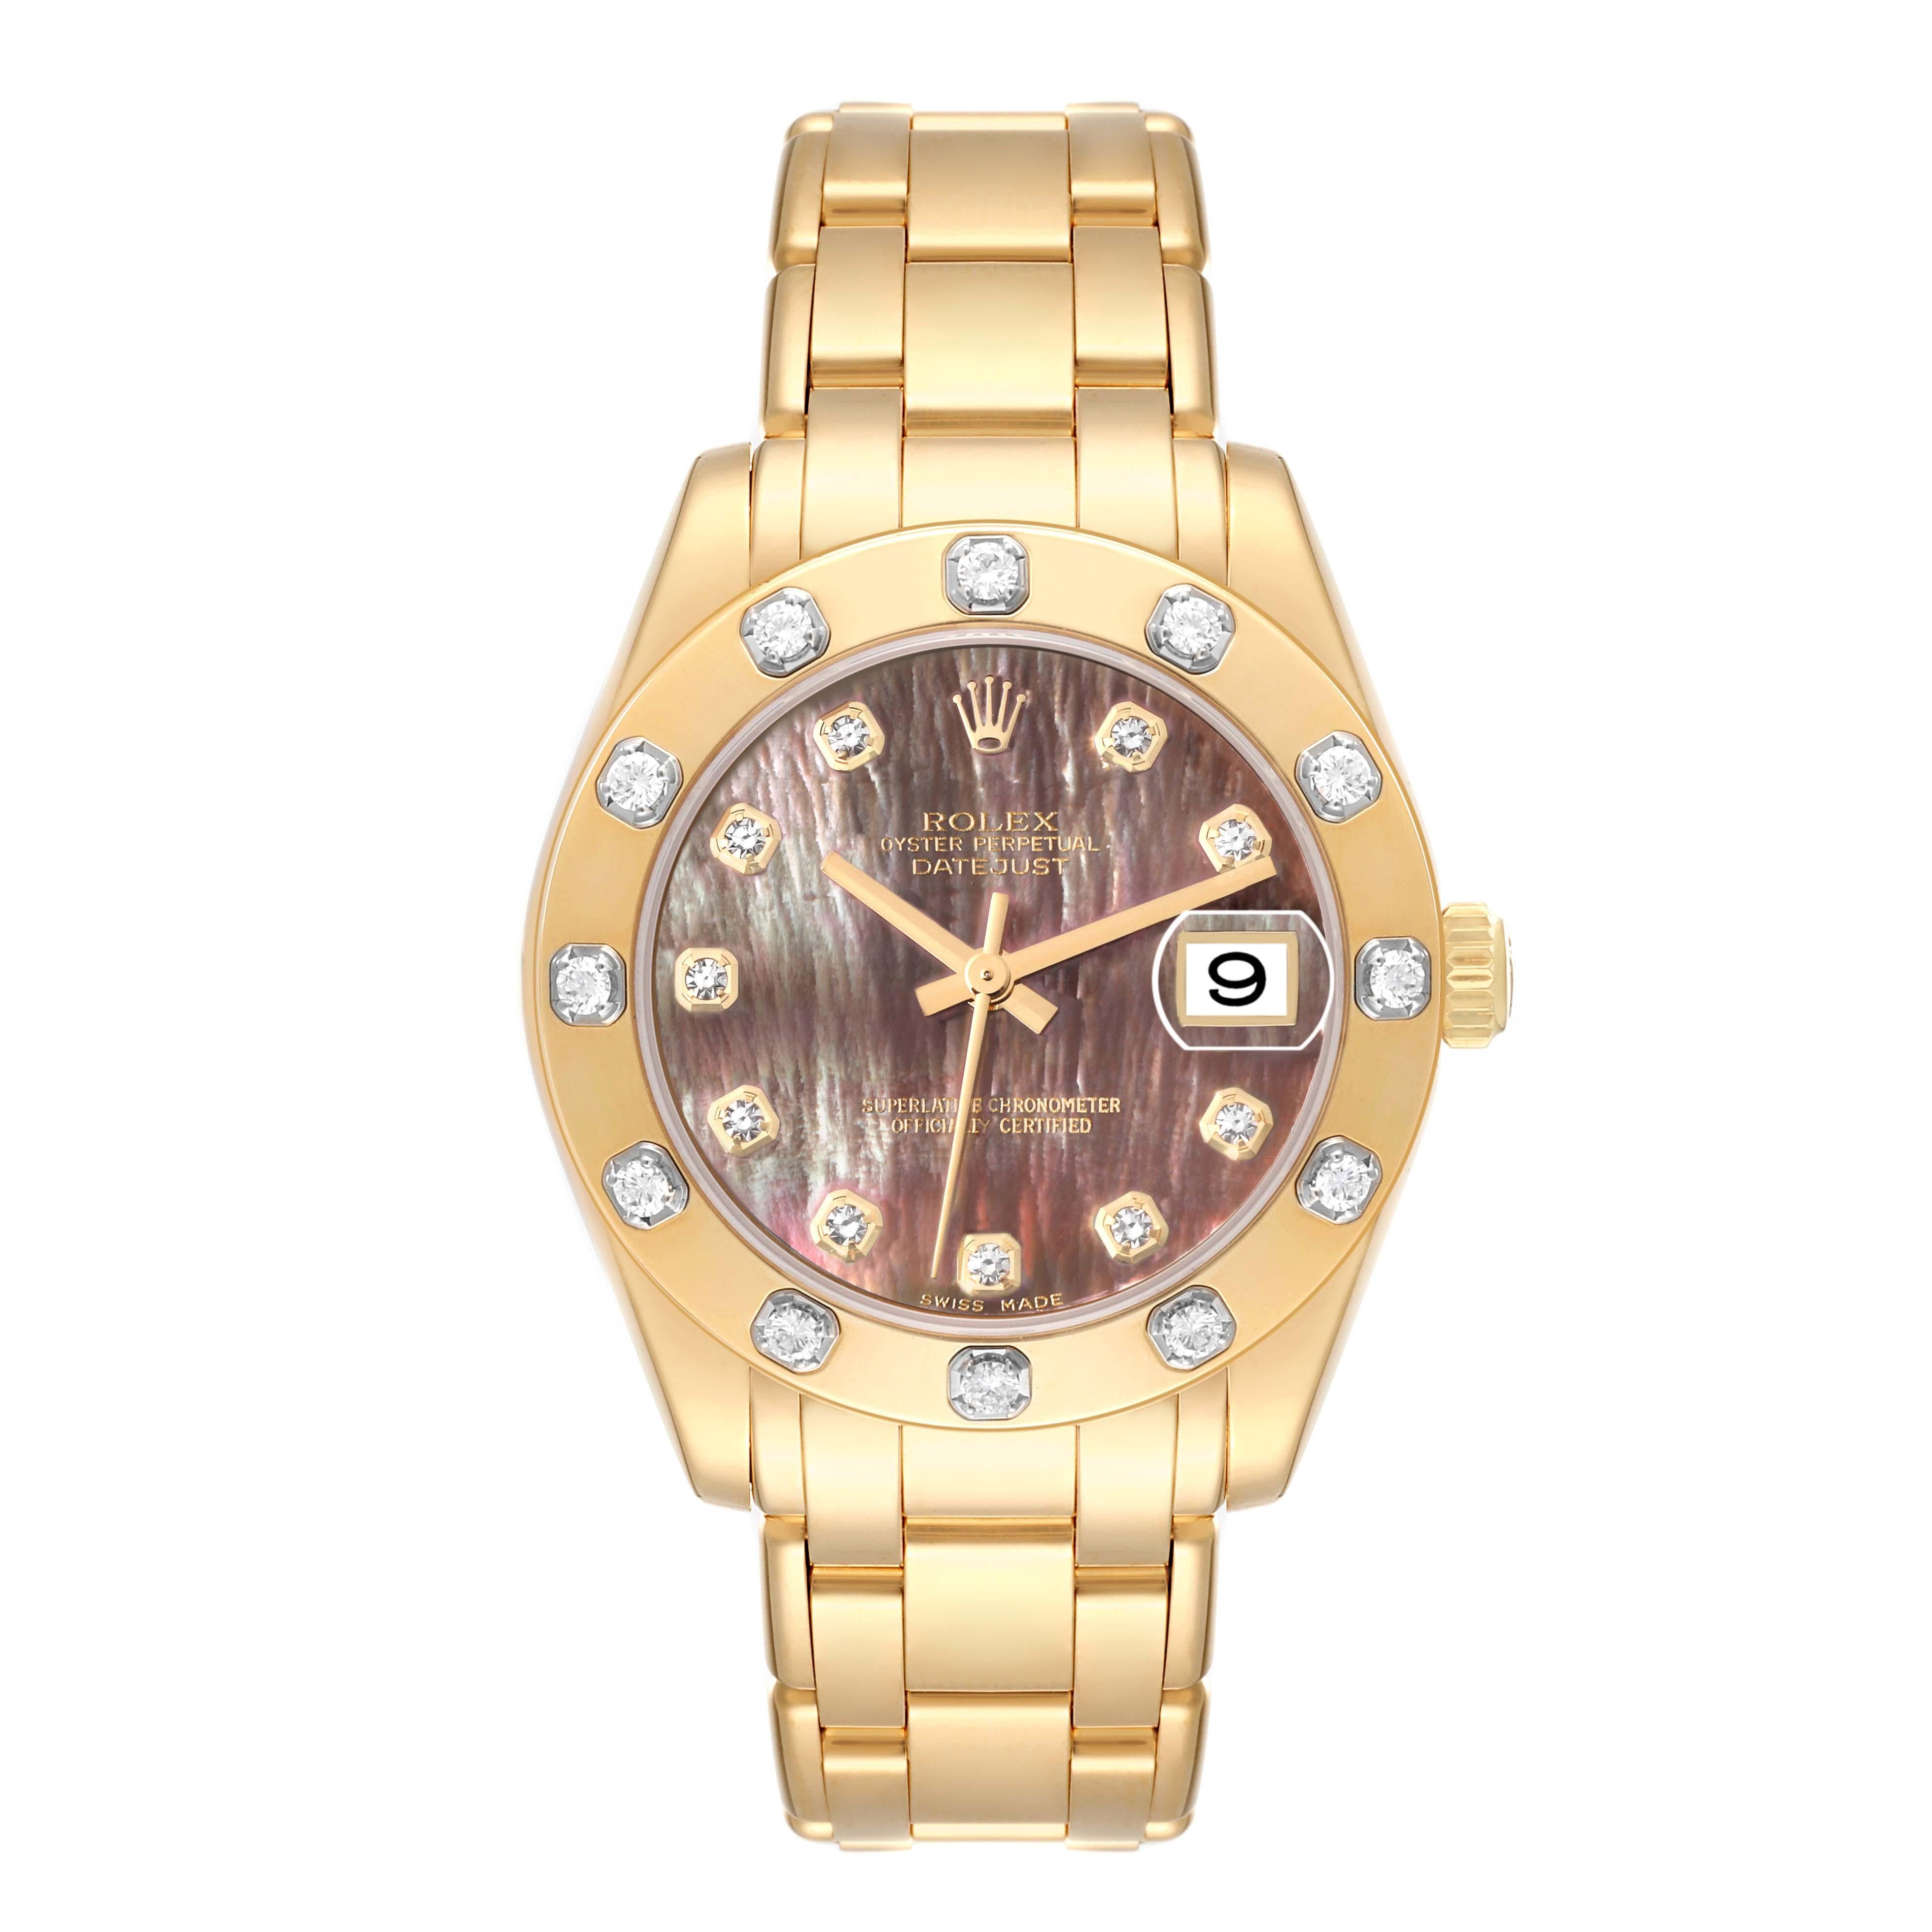 Rolex Pearlmaster Midsize Yellow Gold Mother of Pearl Diamond Ladies Watch 81318. Officially certified chronometer automatic self-winding movement with quickset date function. 18k yellow gold oyster case 34.0 mm in diameter. Rolex logo on a crown.